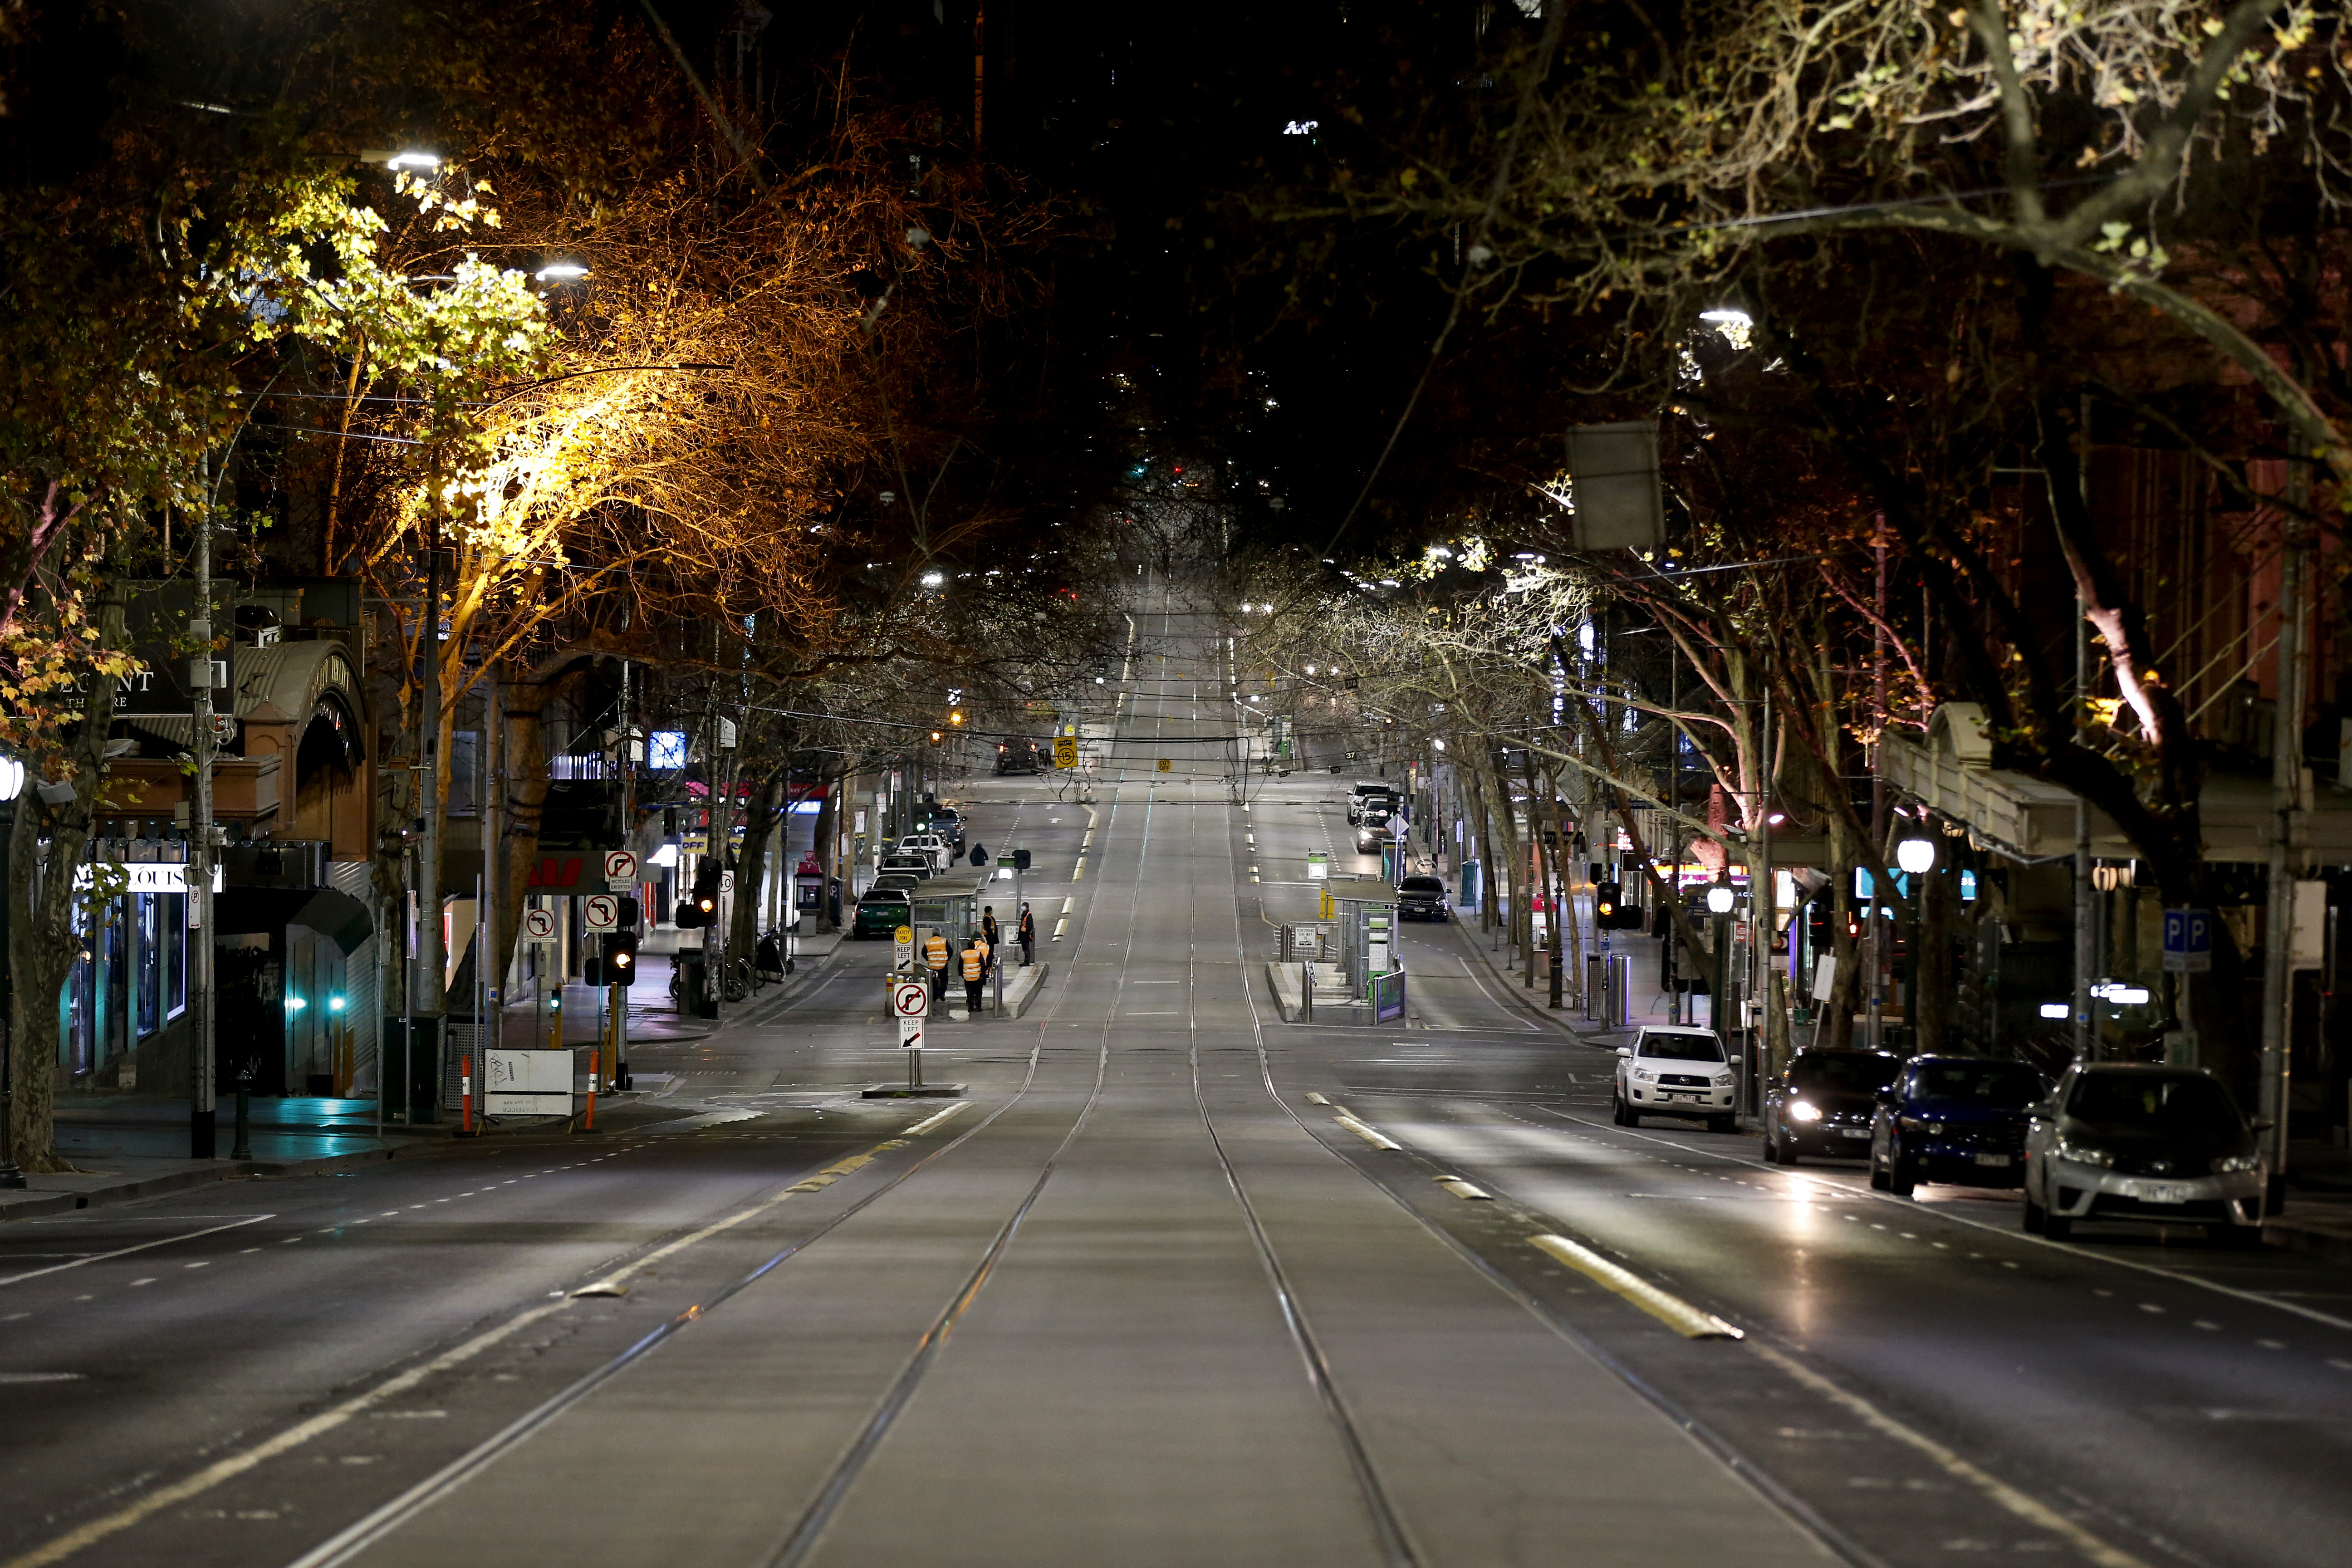 Melbourne's empty streets under lockdown and curfew – in pictures, Australia news